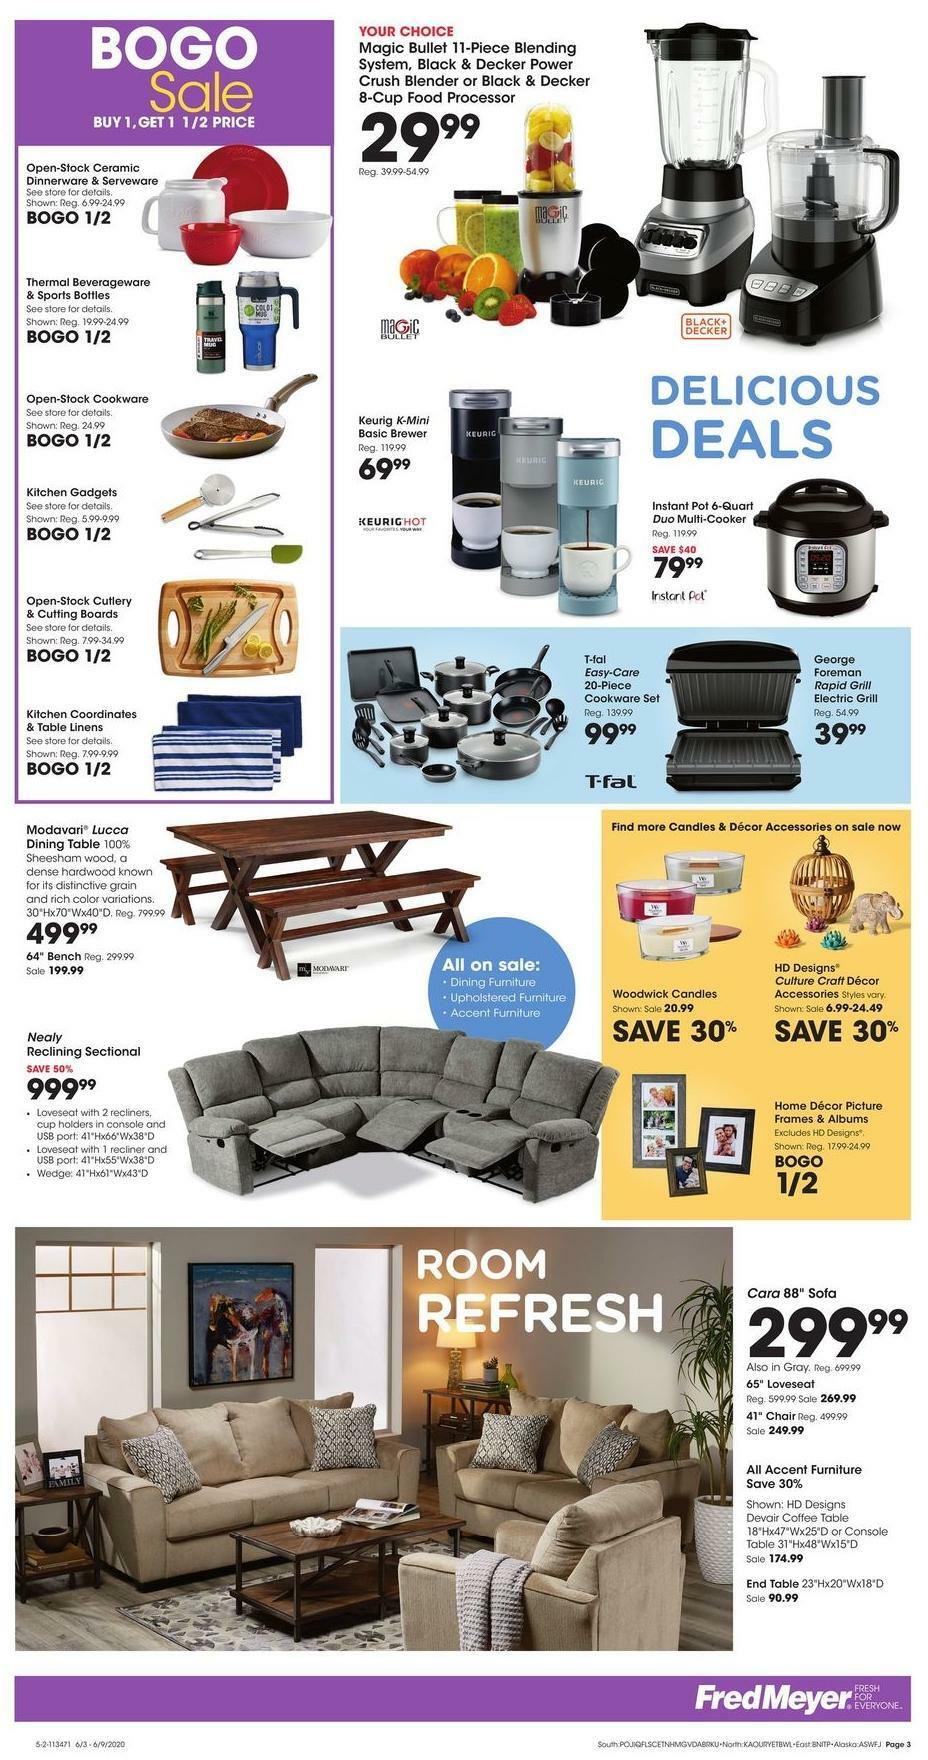 Fred Meyer General Merchandise Weekly Ad from June 3